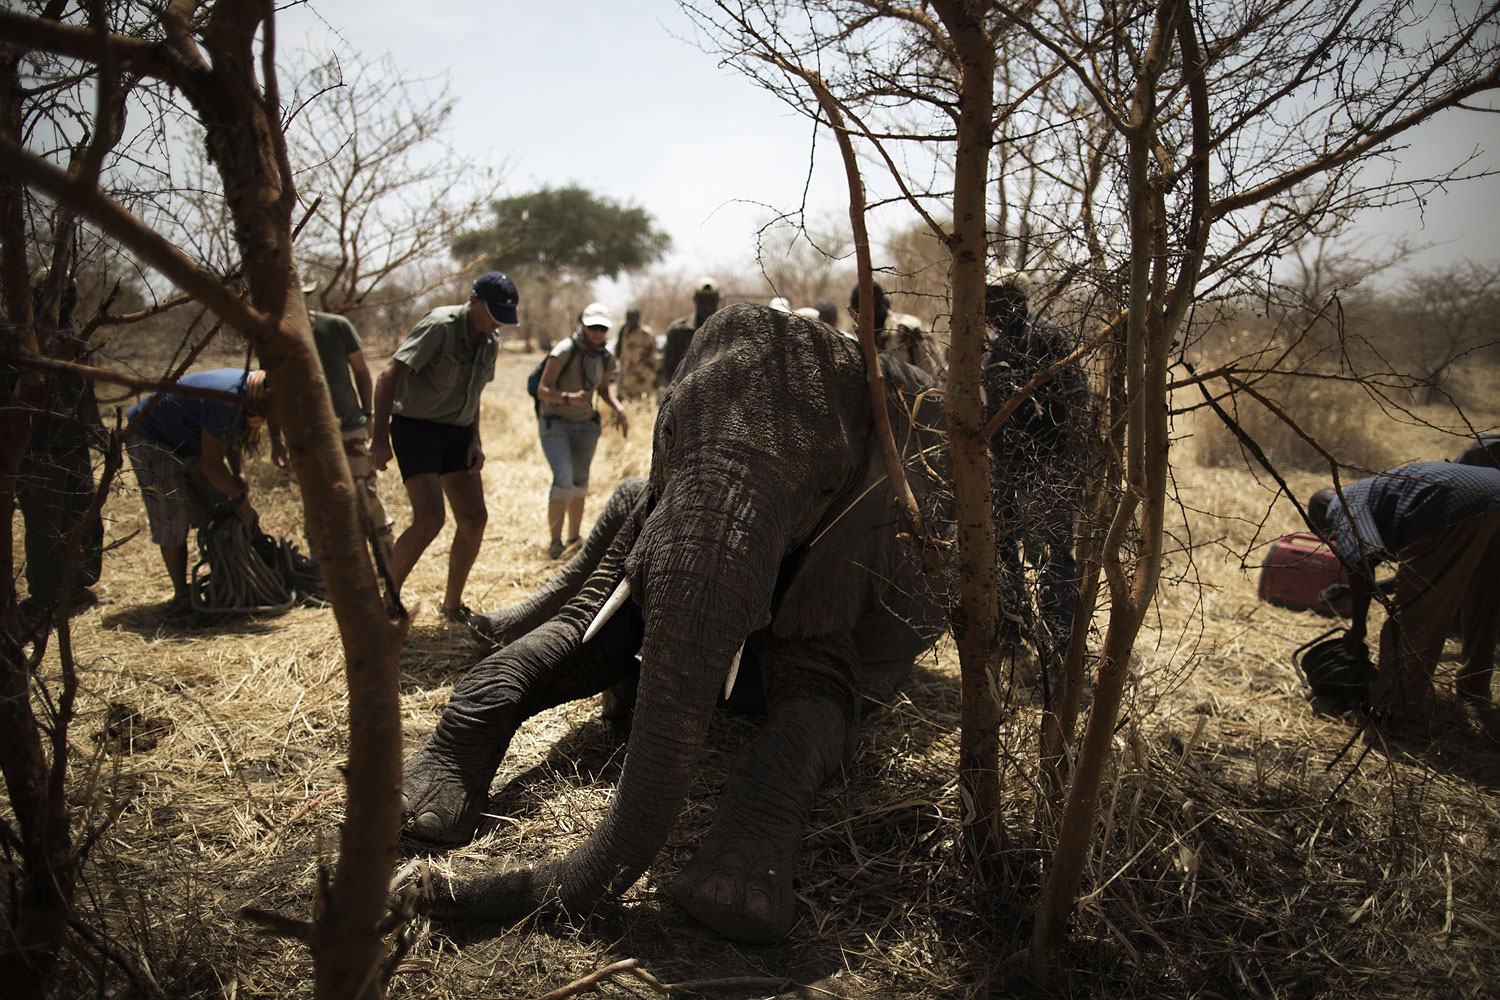 African Parks staff scramble to help an elephant who fell on a dangerous position after being darted at the Zakouma National Park on Feb. 23, 2014 during a collaring operation aimed at preserving elephants in the park.